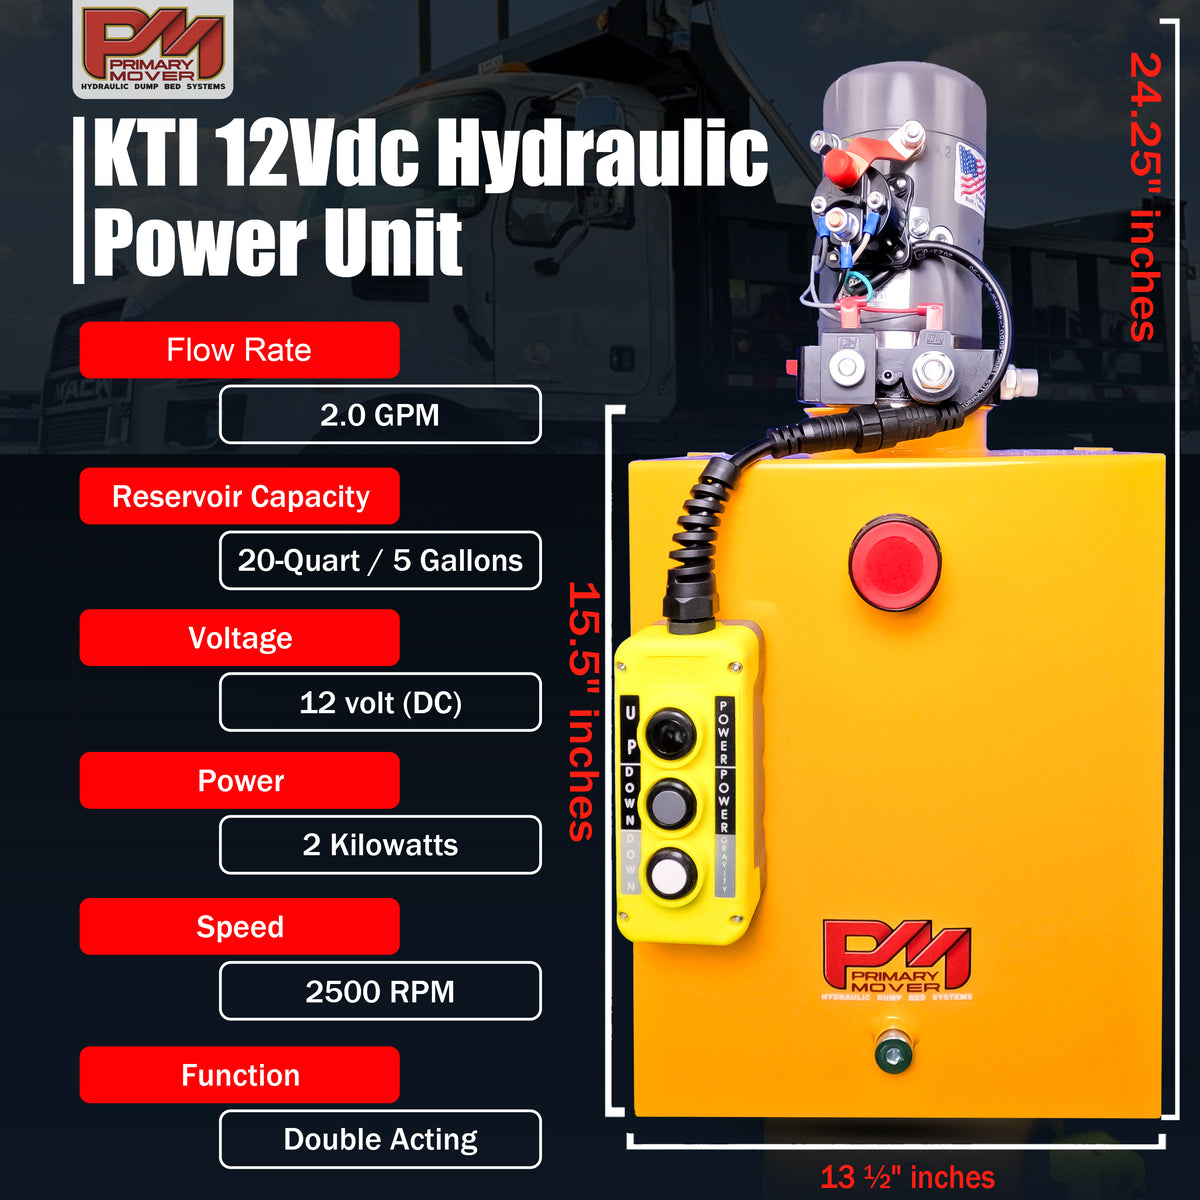 KTI 12V Double-Acting Hydraulic Pump with Steel Reservoir, featuring a red button and switch, ideal for efficient hydraulic dump bed systems and heavy-duty applications.